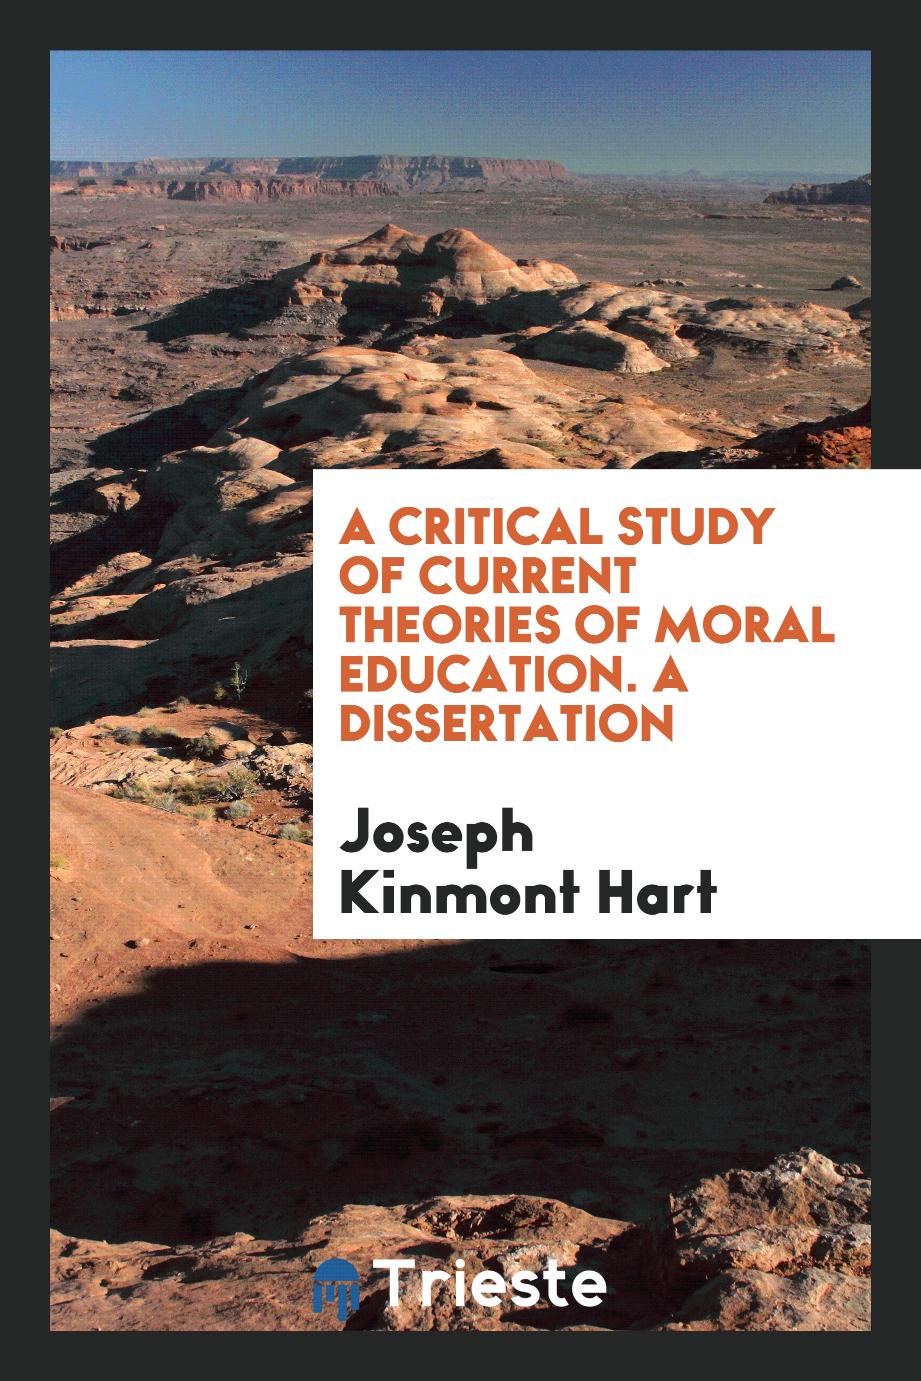 A critical study of current theories of moral education. A dissertation